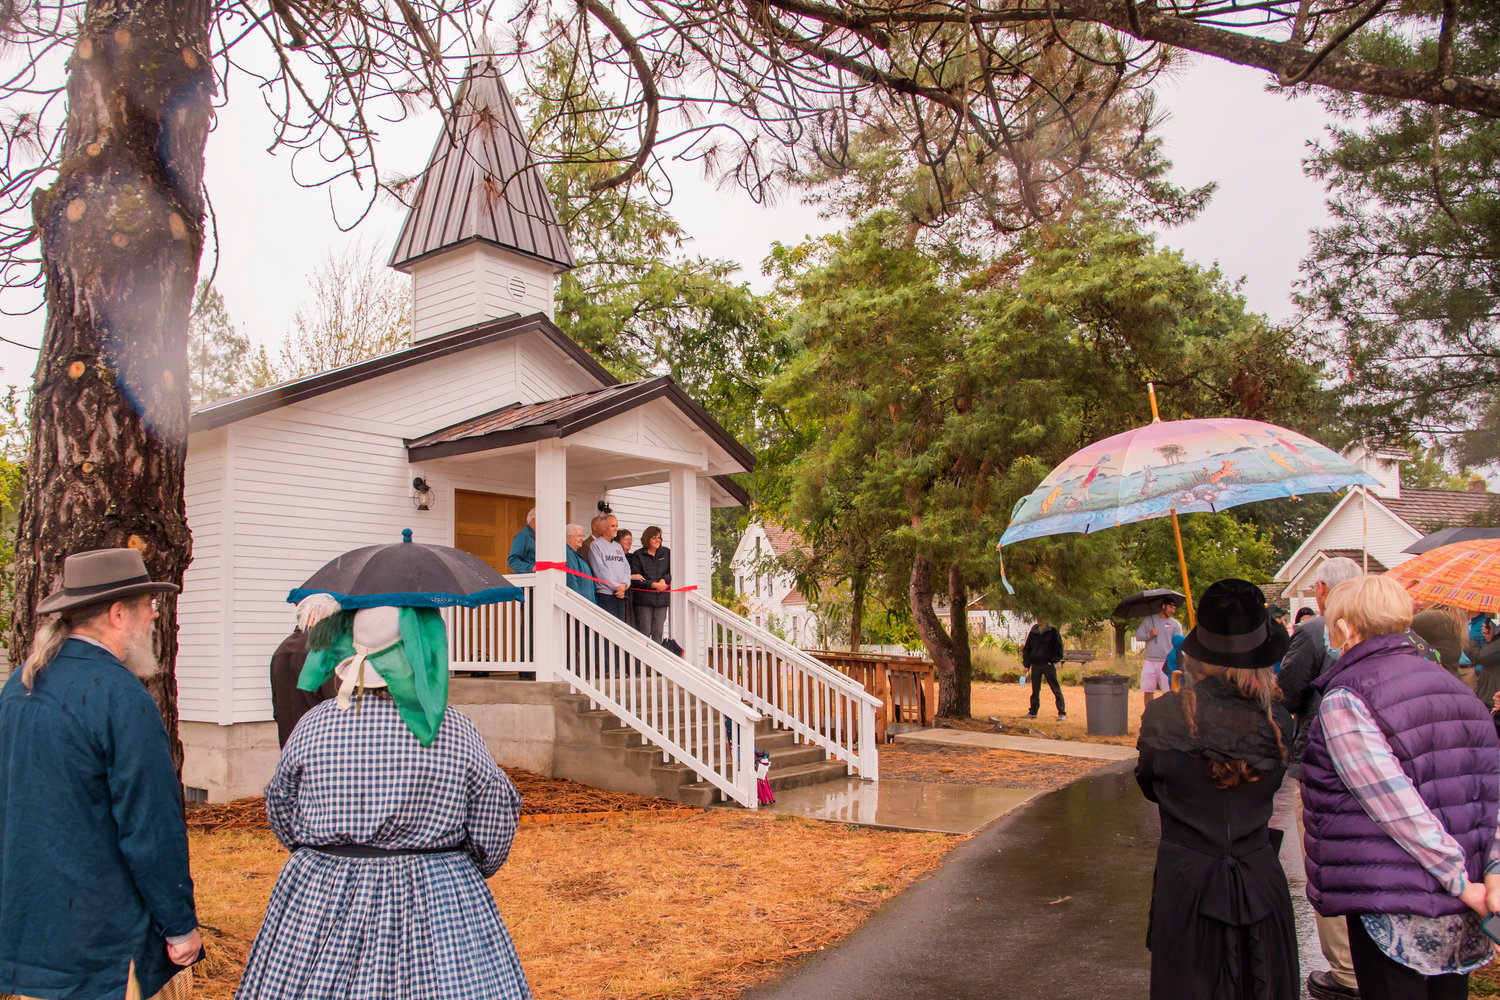 Attendees gather, some sporting vintage attire and umbrellas, during a ribbon cutting ceremony for the Borst Park Pioneer Church in Centralia on Saturday.